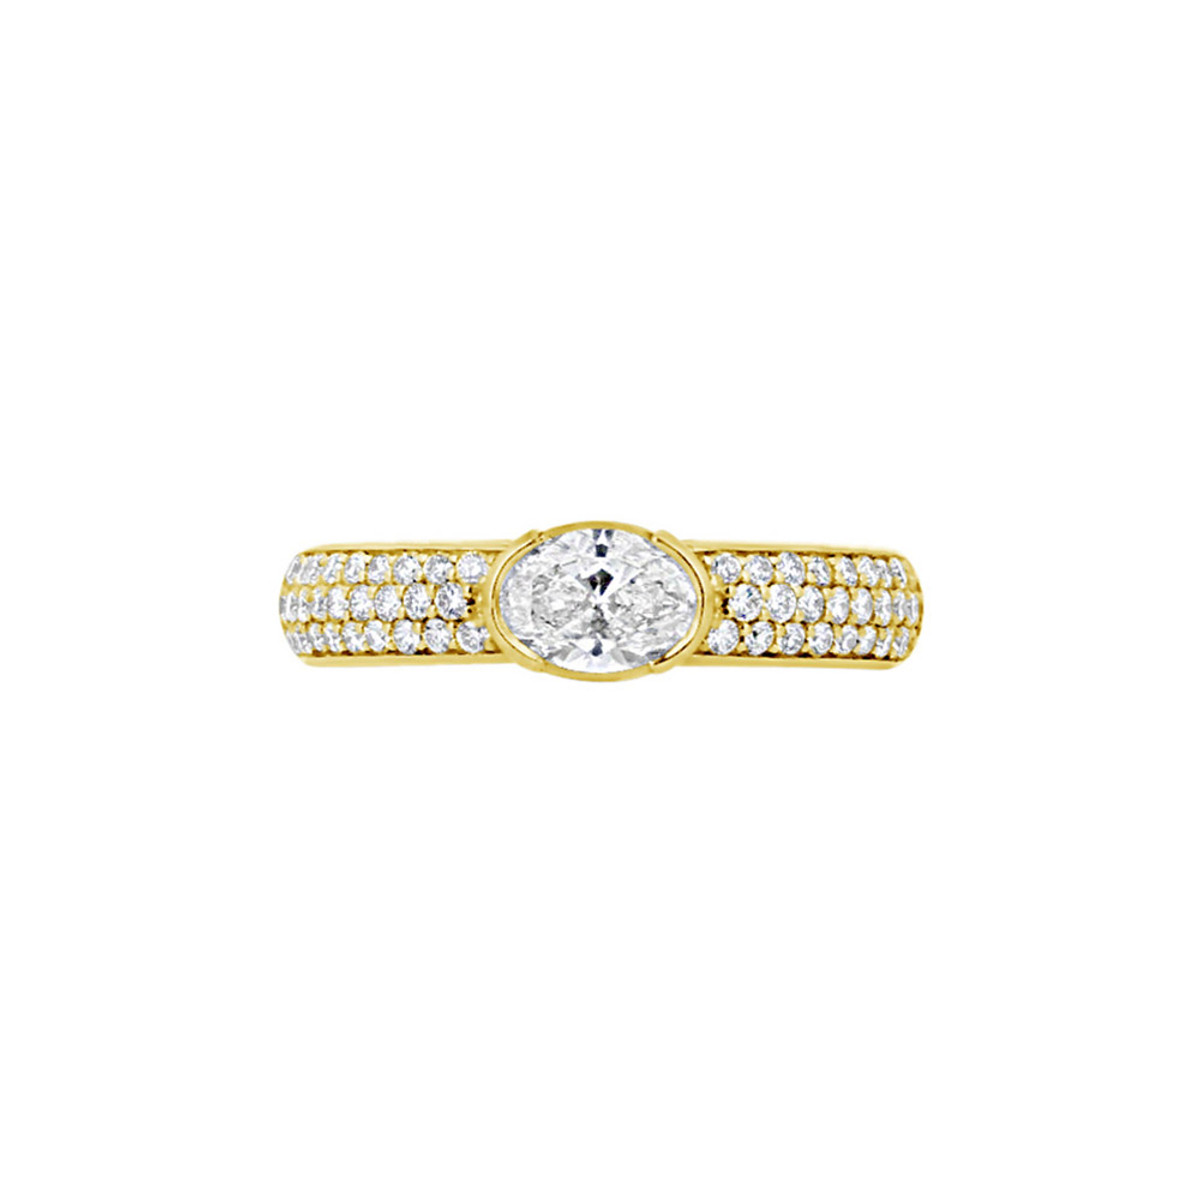 Norman Silverman 18KT Yellow Gold & GIA Oval Diamond Pave Band-DSHFO0036 Product Image